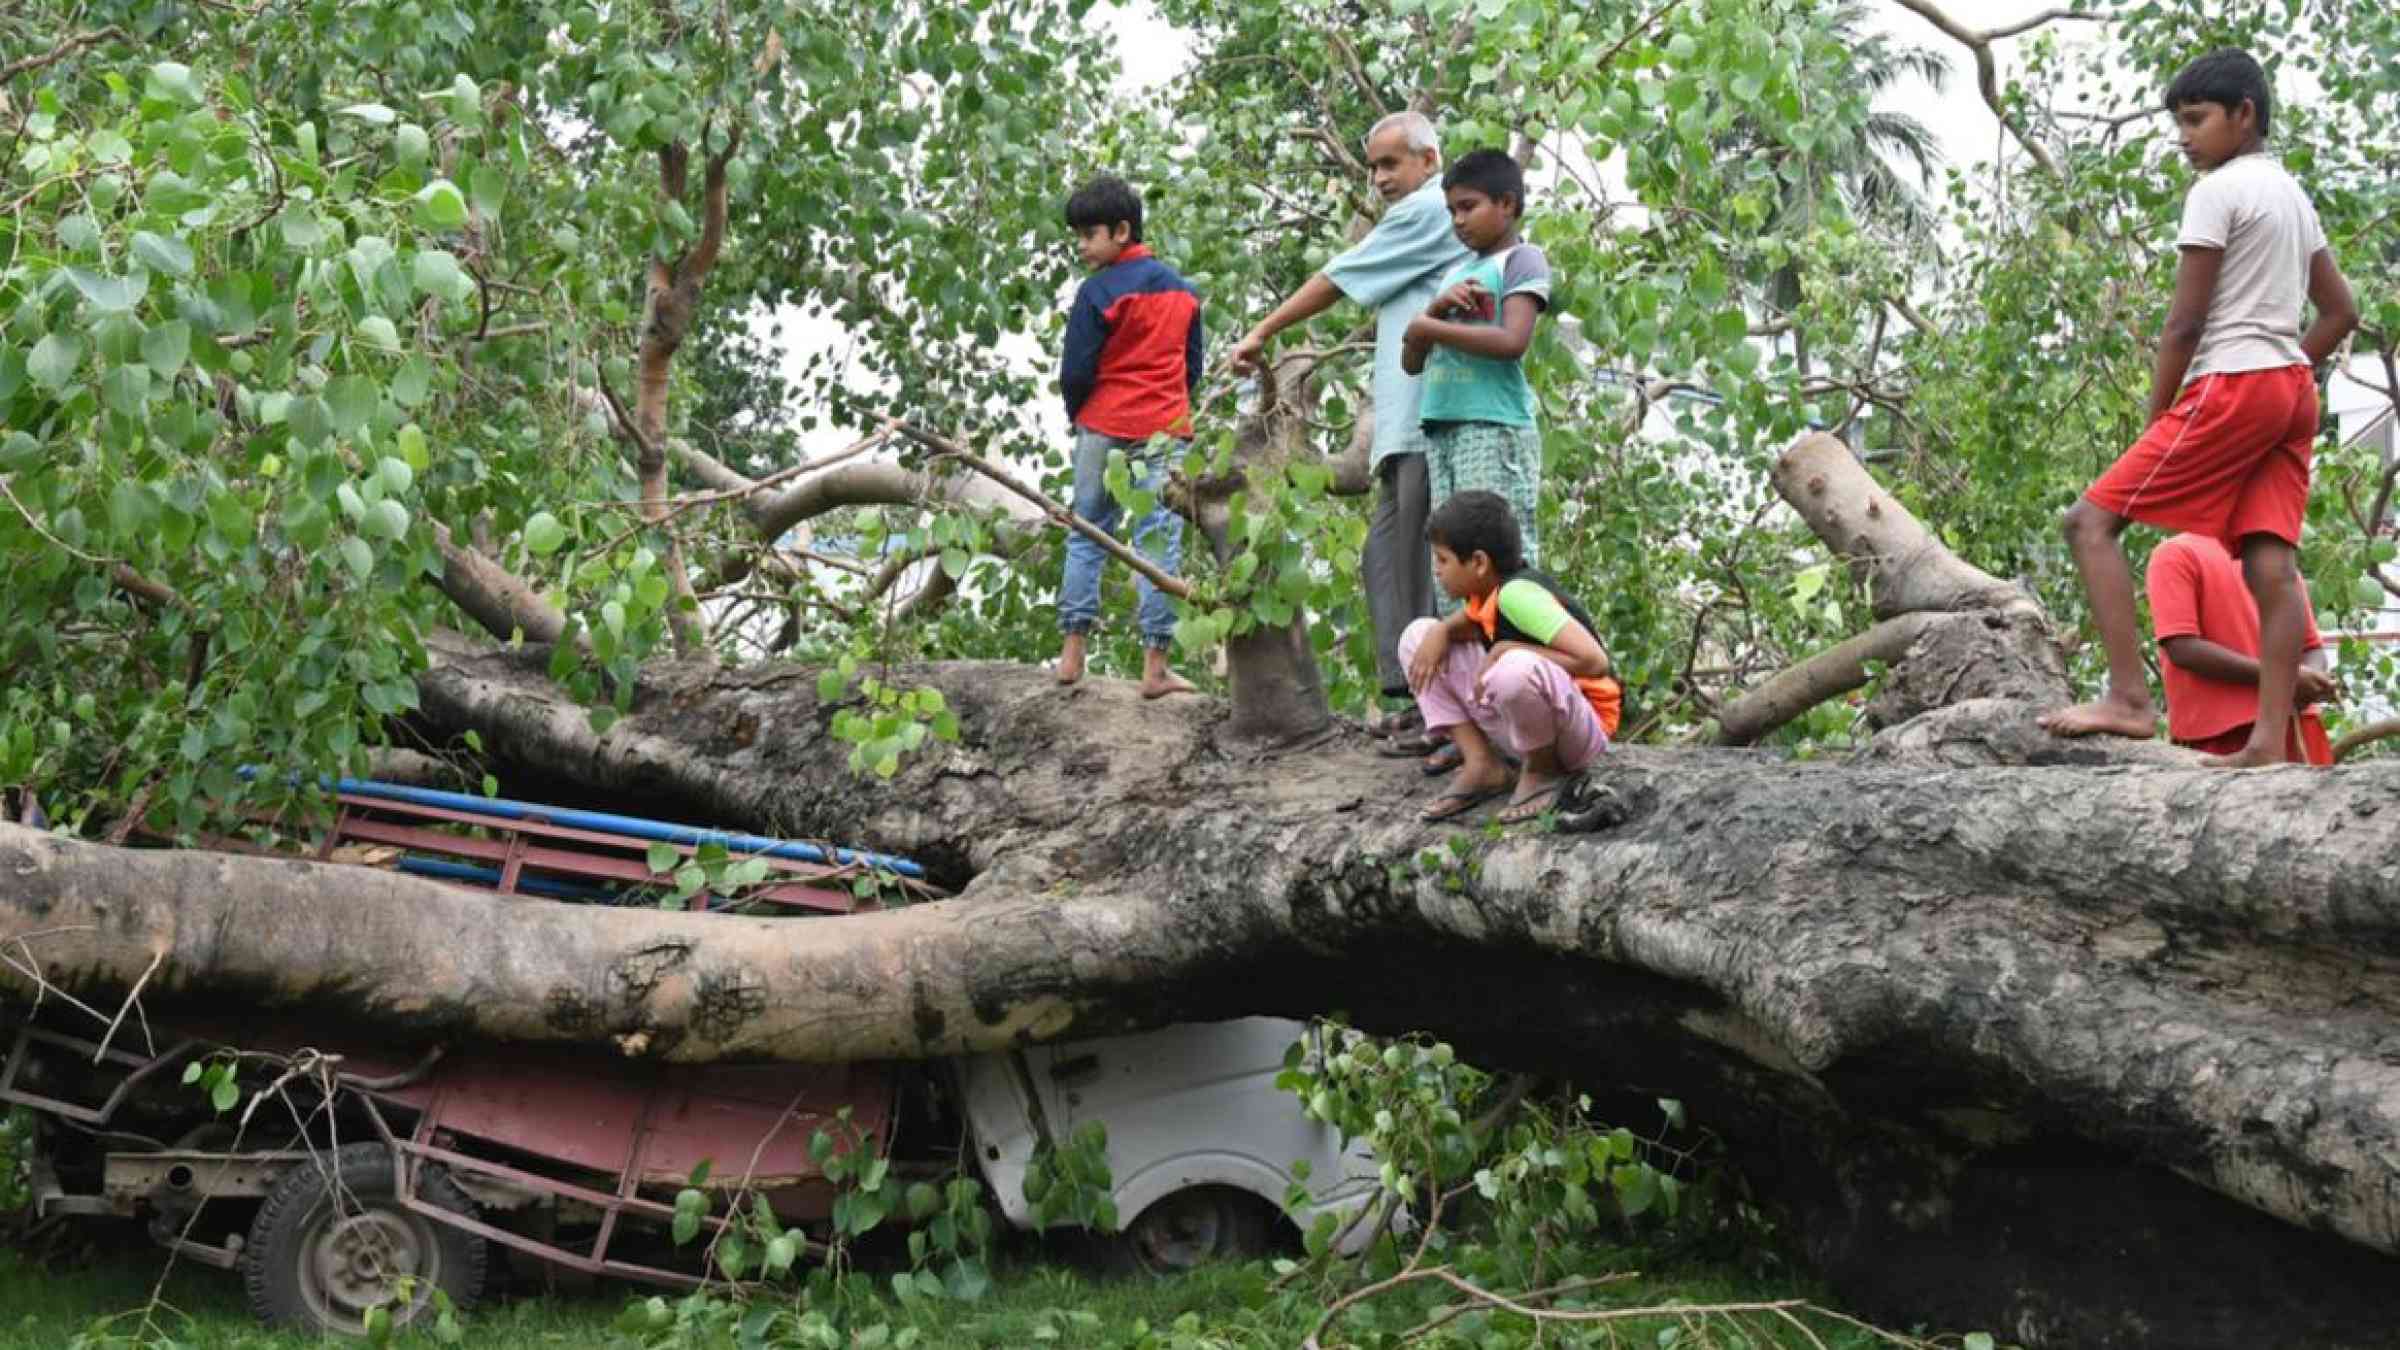 Impact of Cyclone Amphan in West Bengal, India, May 2020. Sanjoy Karmakar/Shutterstock